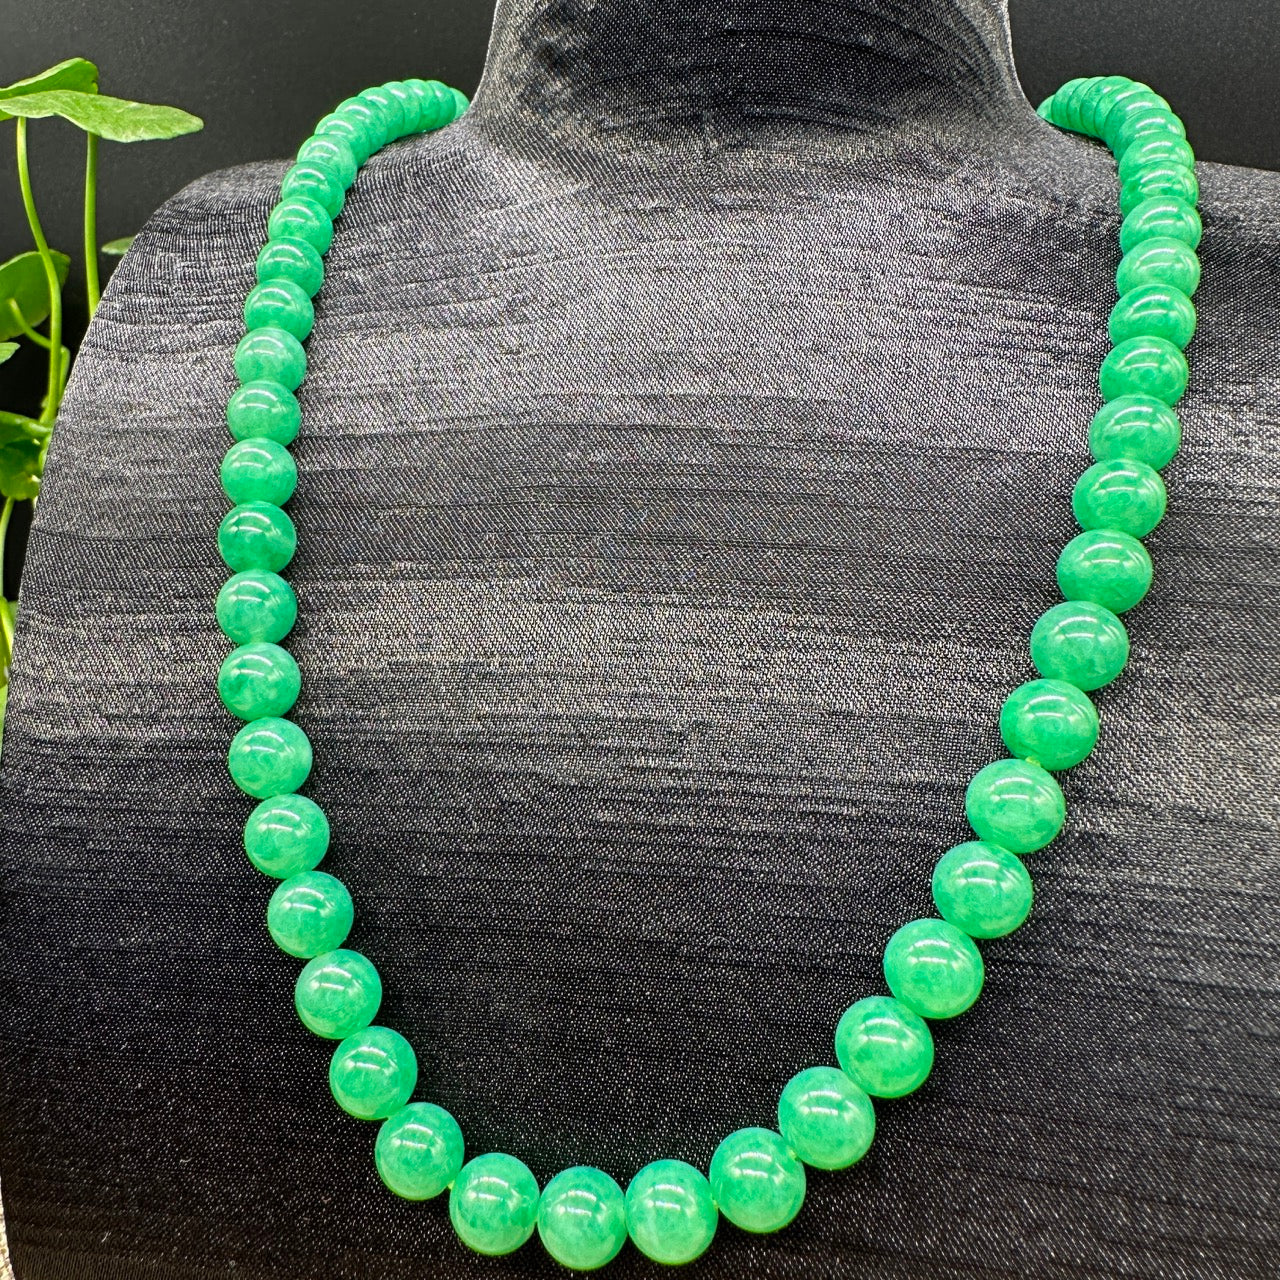 Radiant Opulence: High-End Jadeite Jade Beads Necklace ( Collectibles )